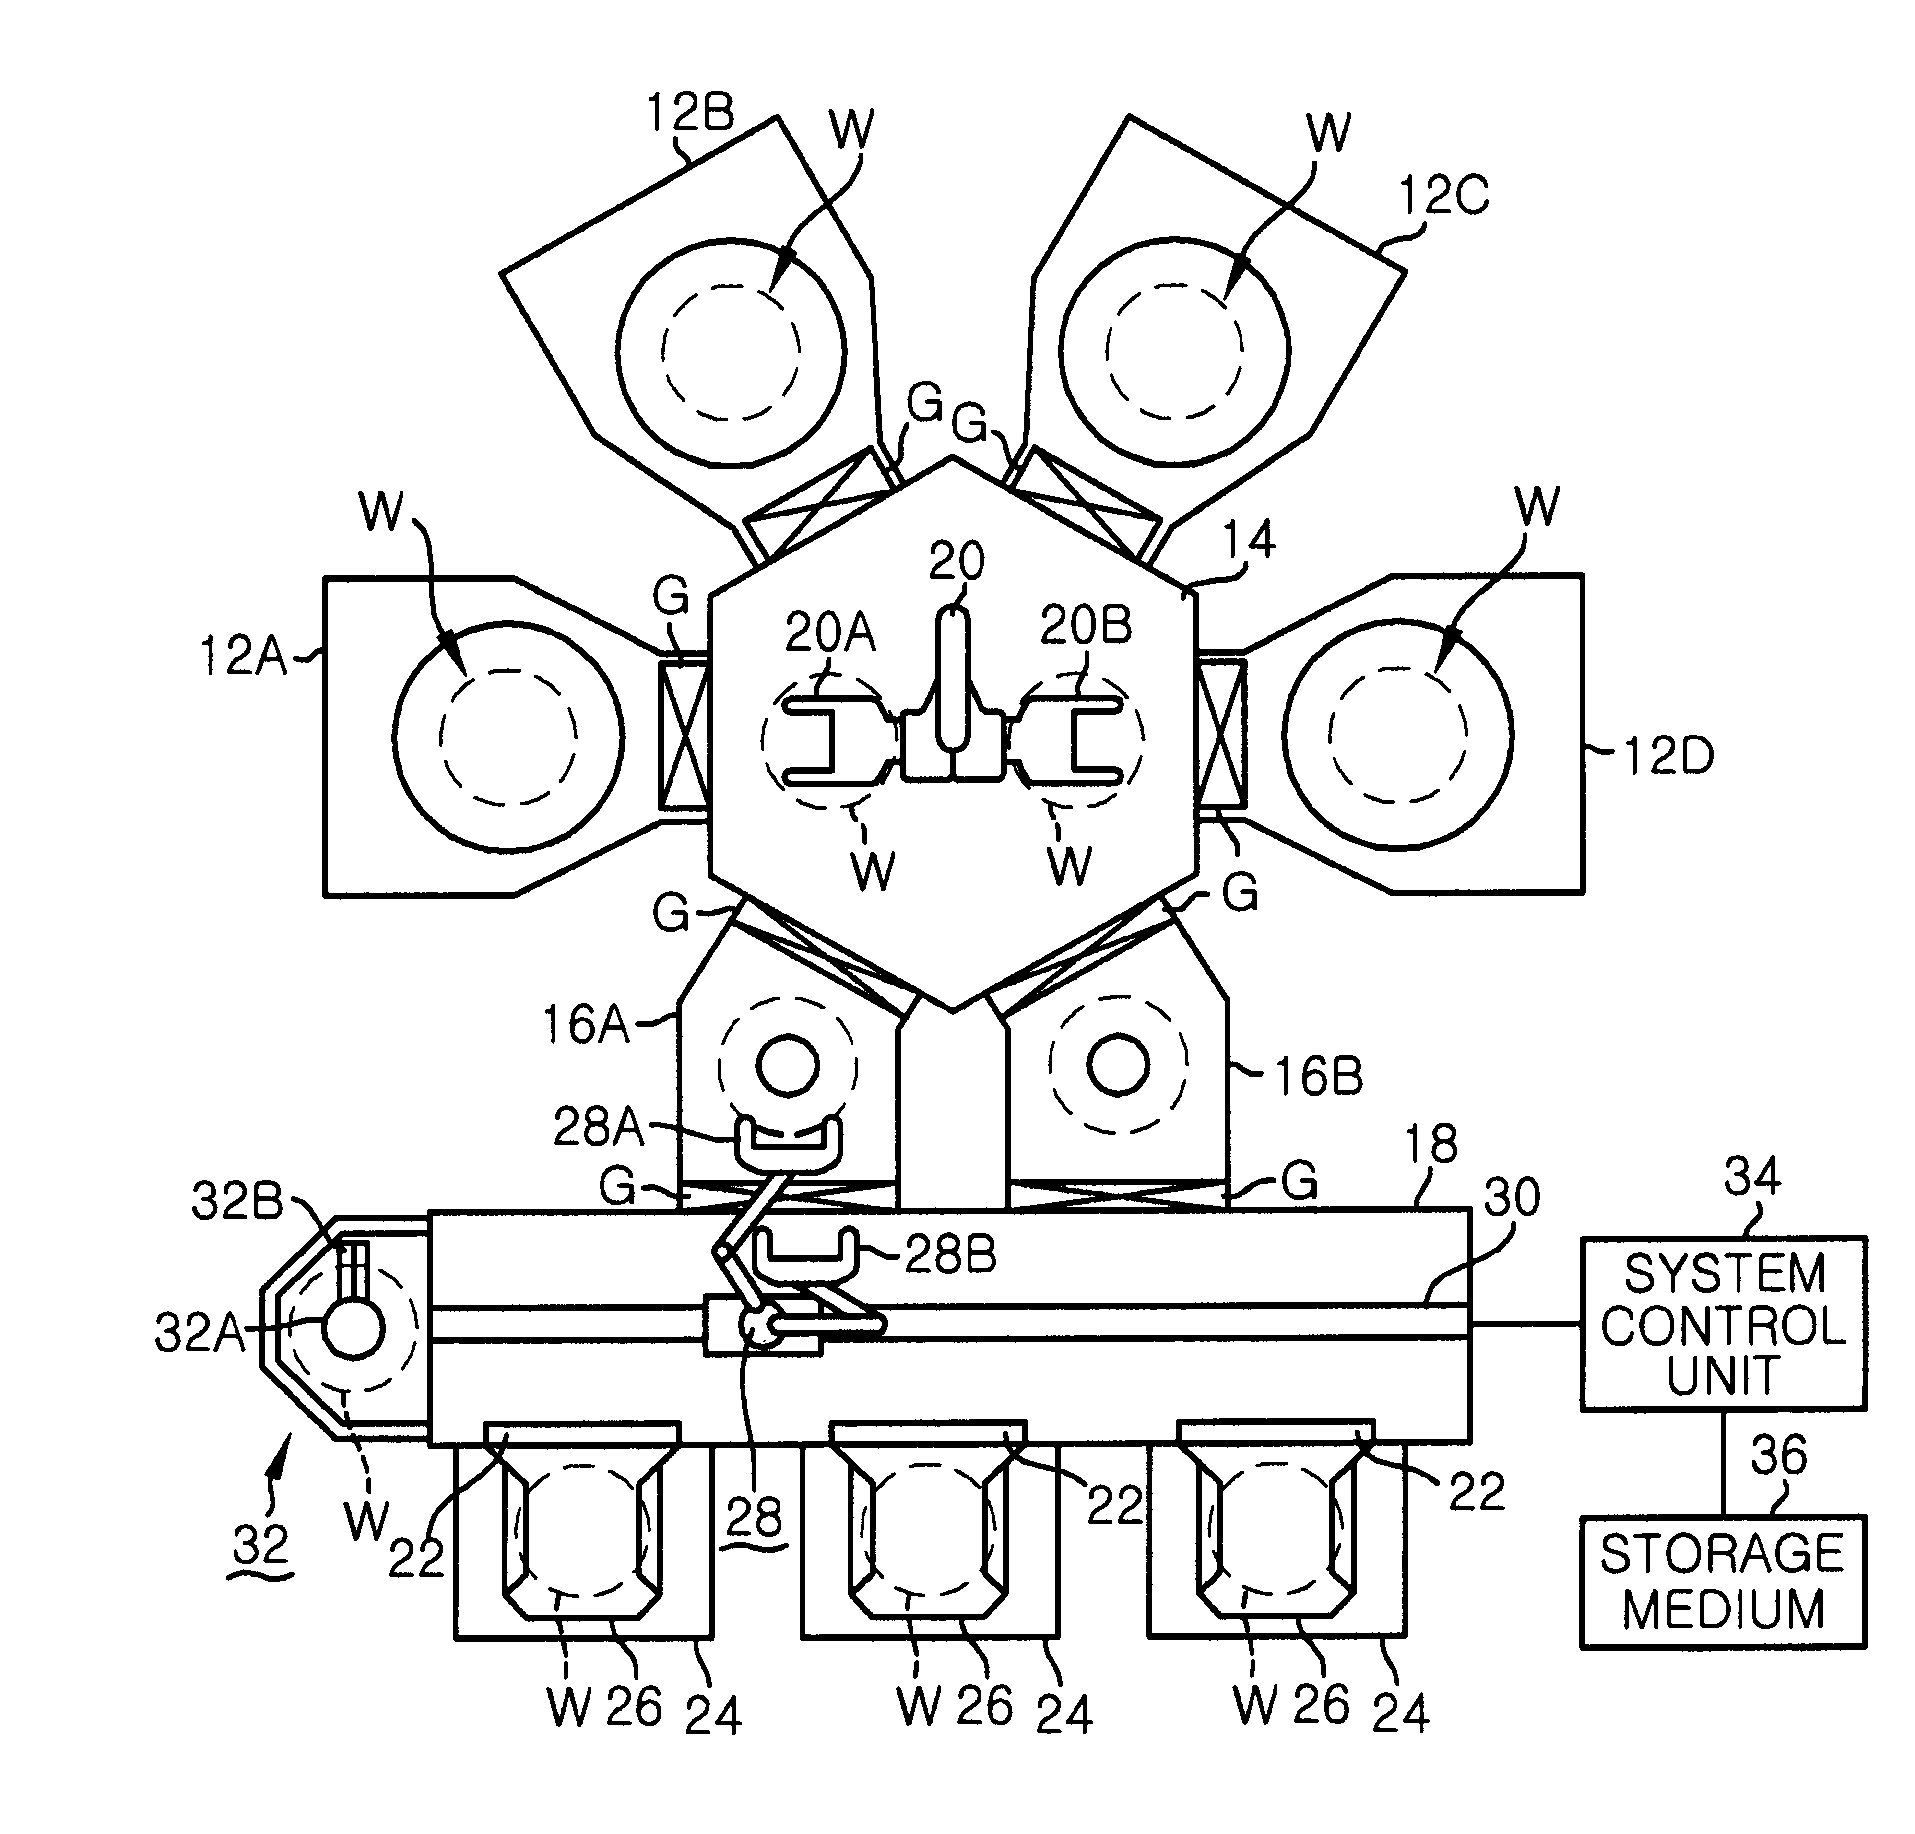 Film forming method and processing system